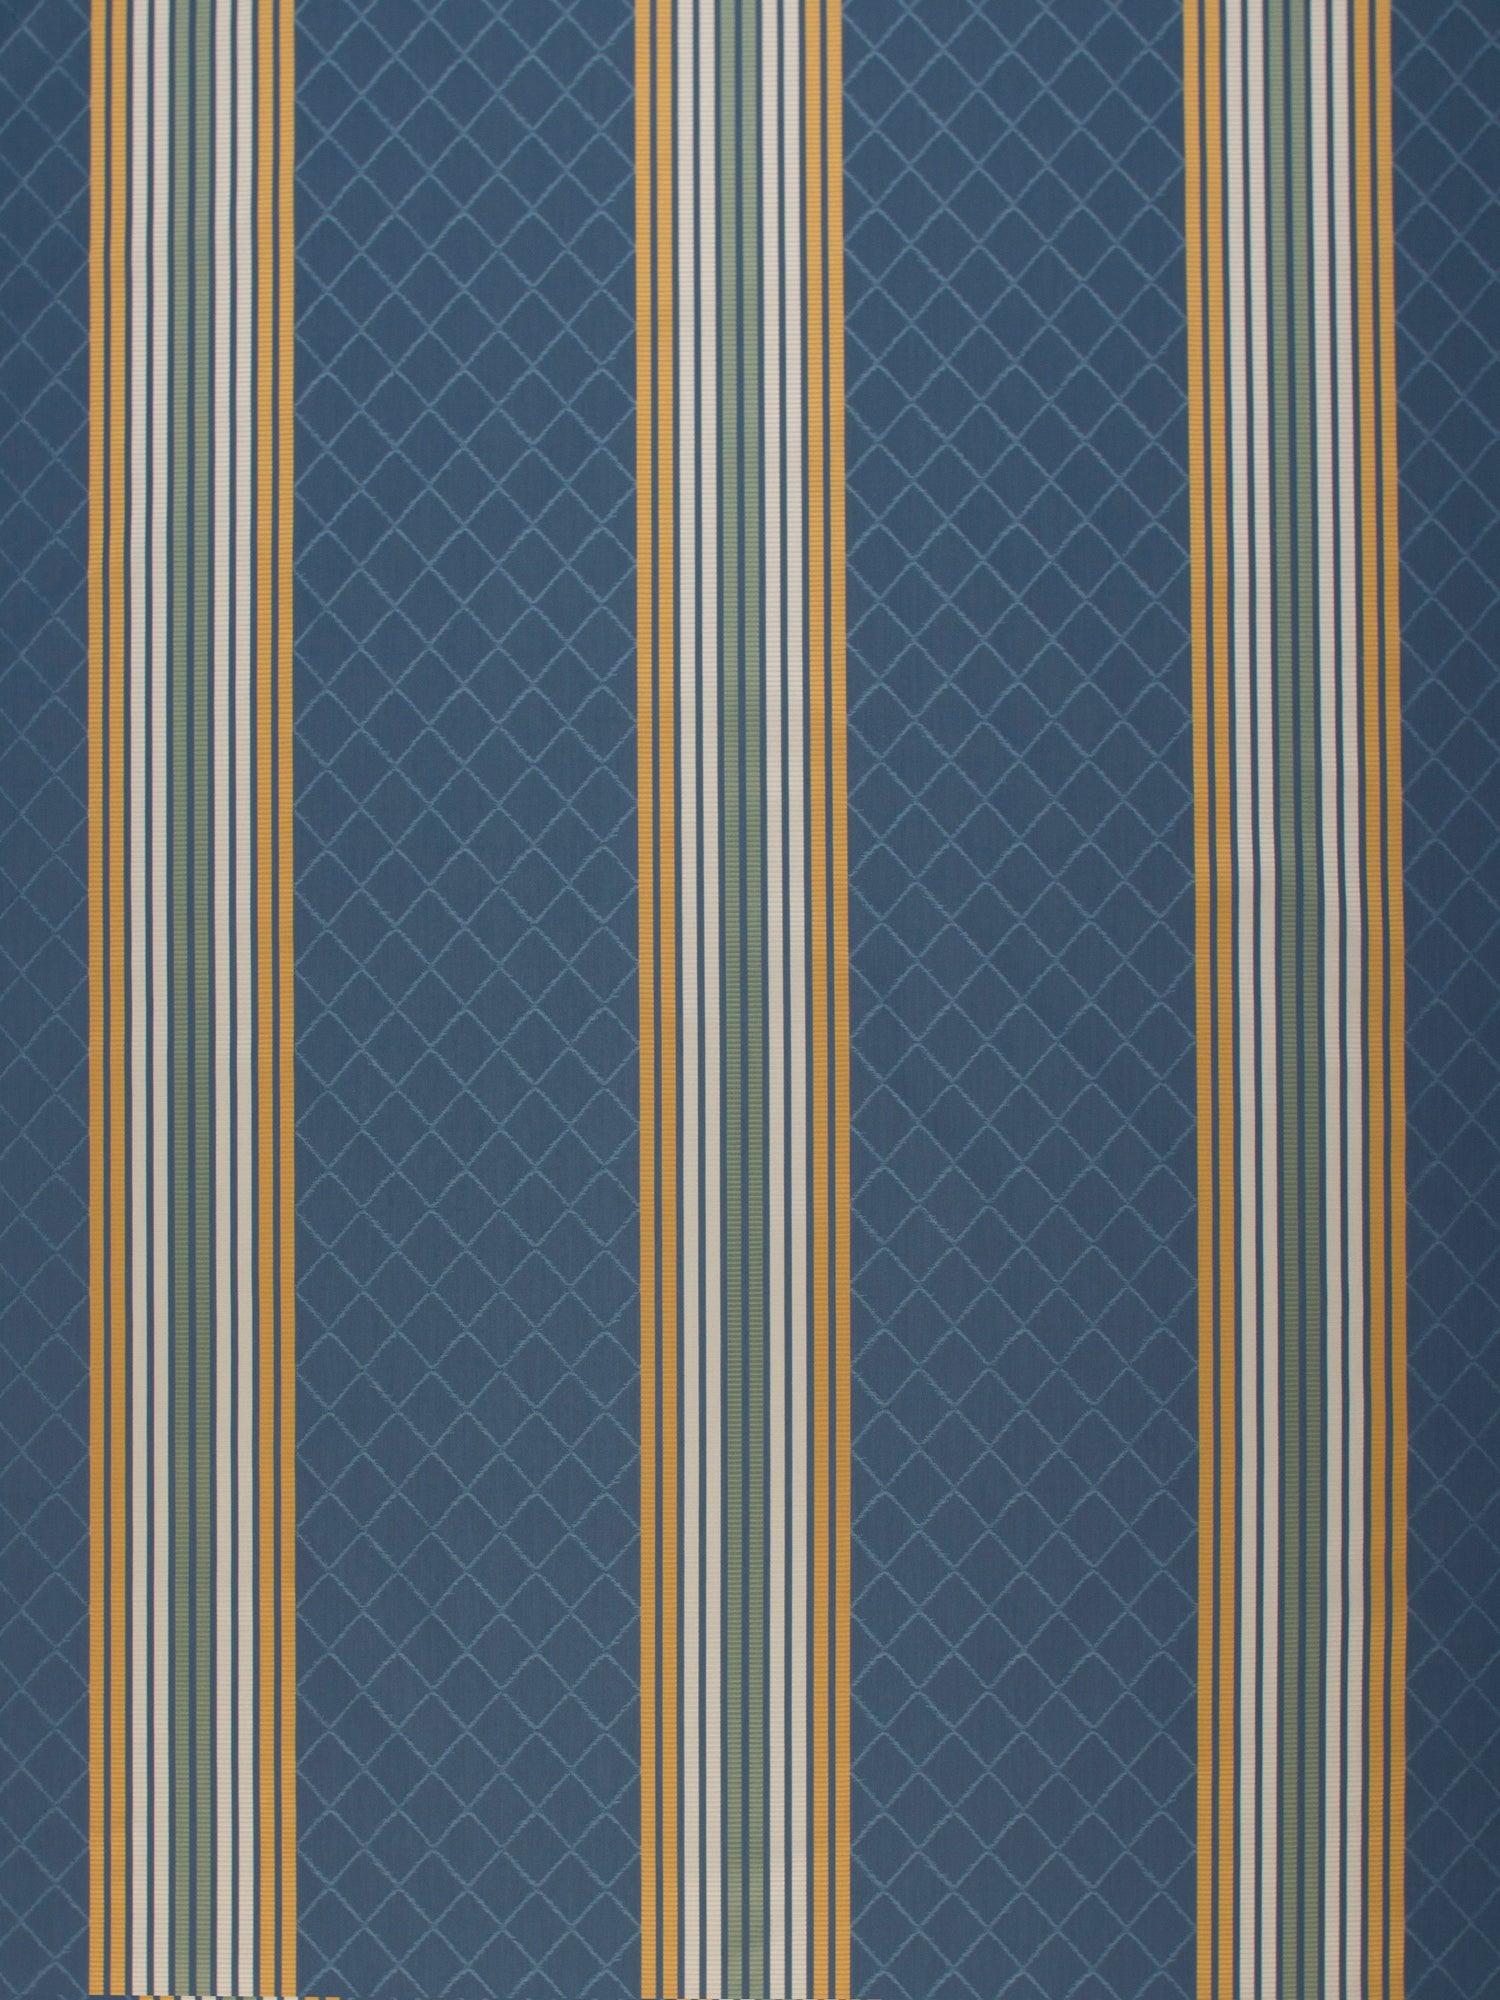 Roquebrune fabric in ocean color - pattern number HA 00081268 - by Scalamandre in the Old World Weavers collection